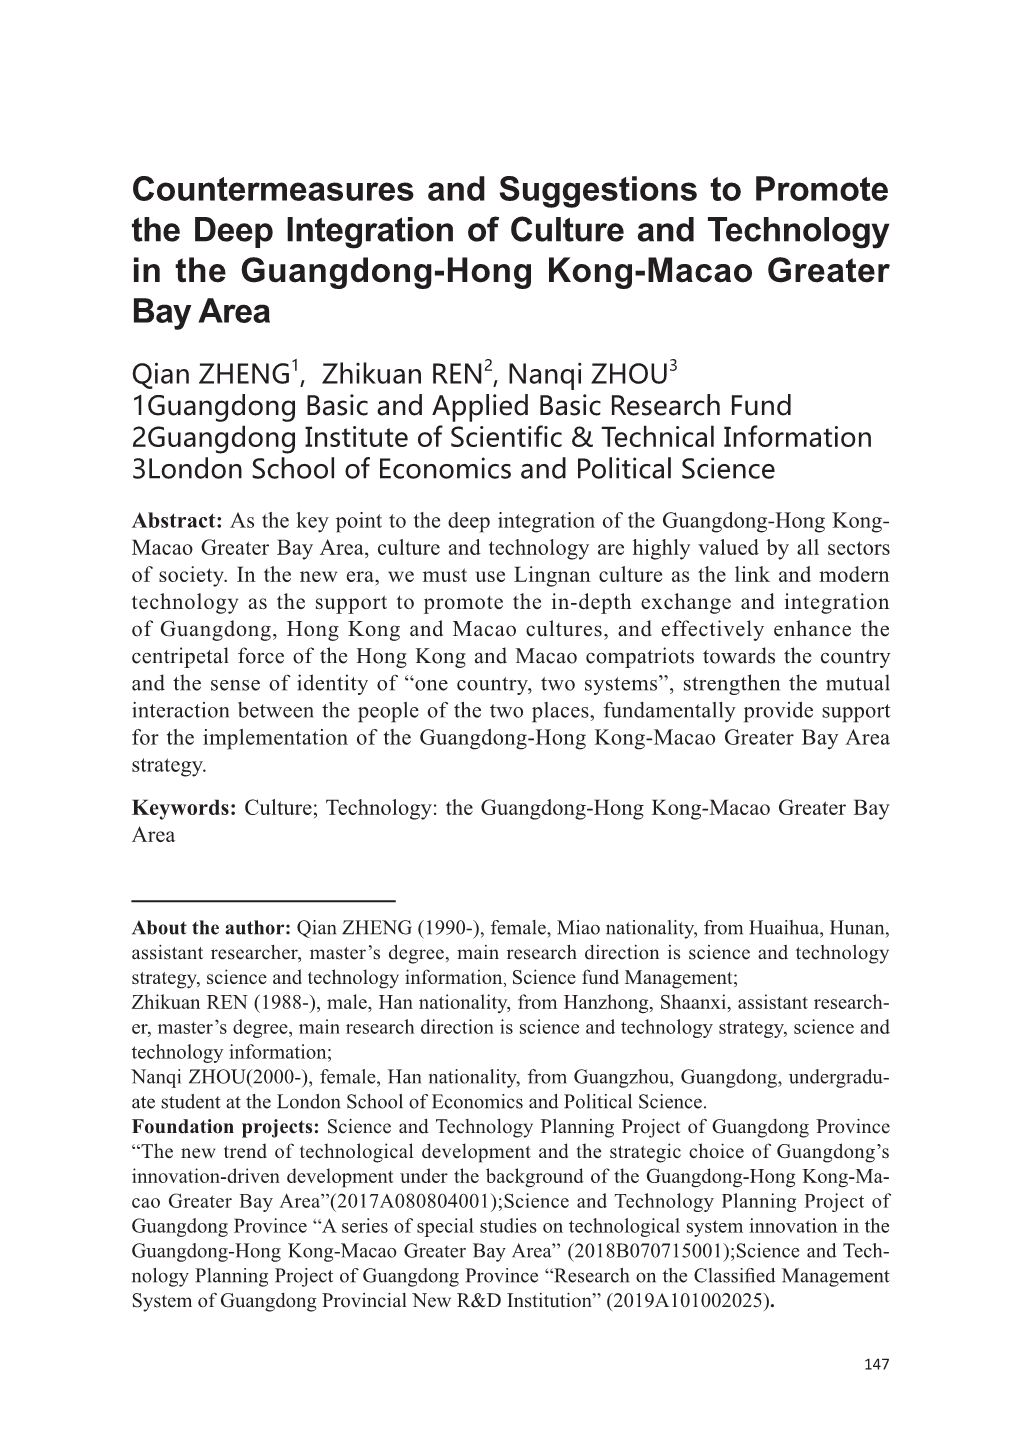 Countermeasures and Suggestions to Promote the Deep Integration of Culture and Technology in the Guangdong-Hong Kong-Macao Greater Bay Area